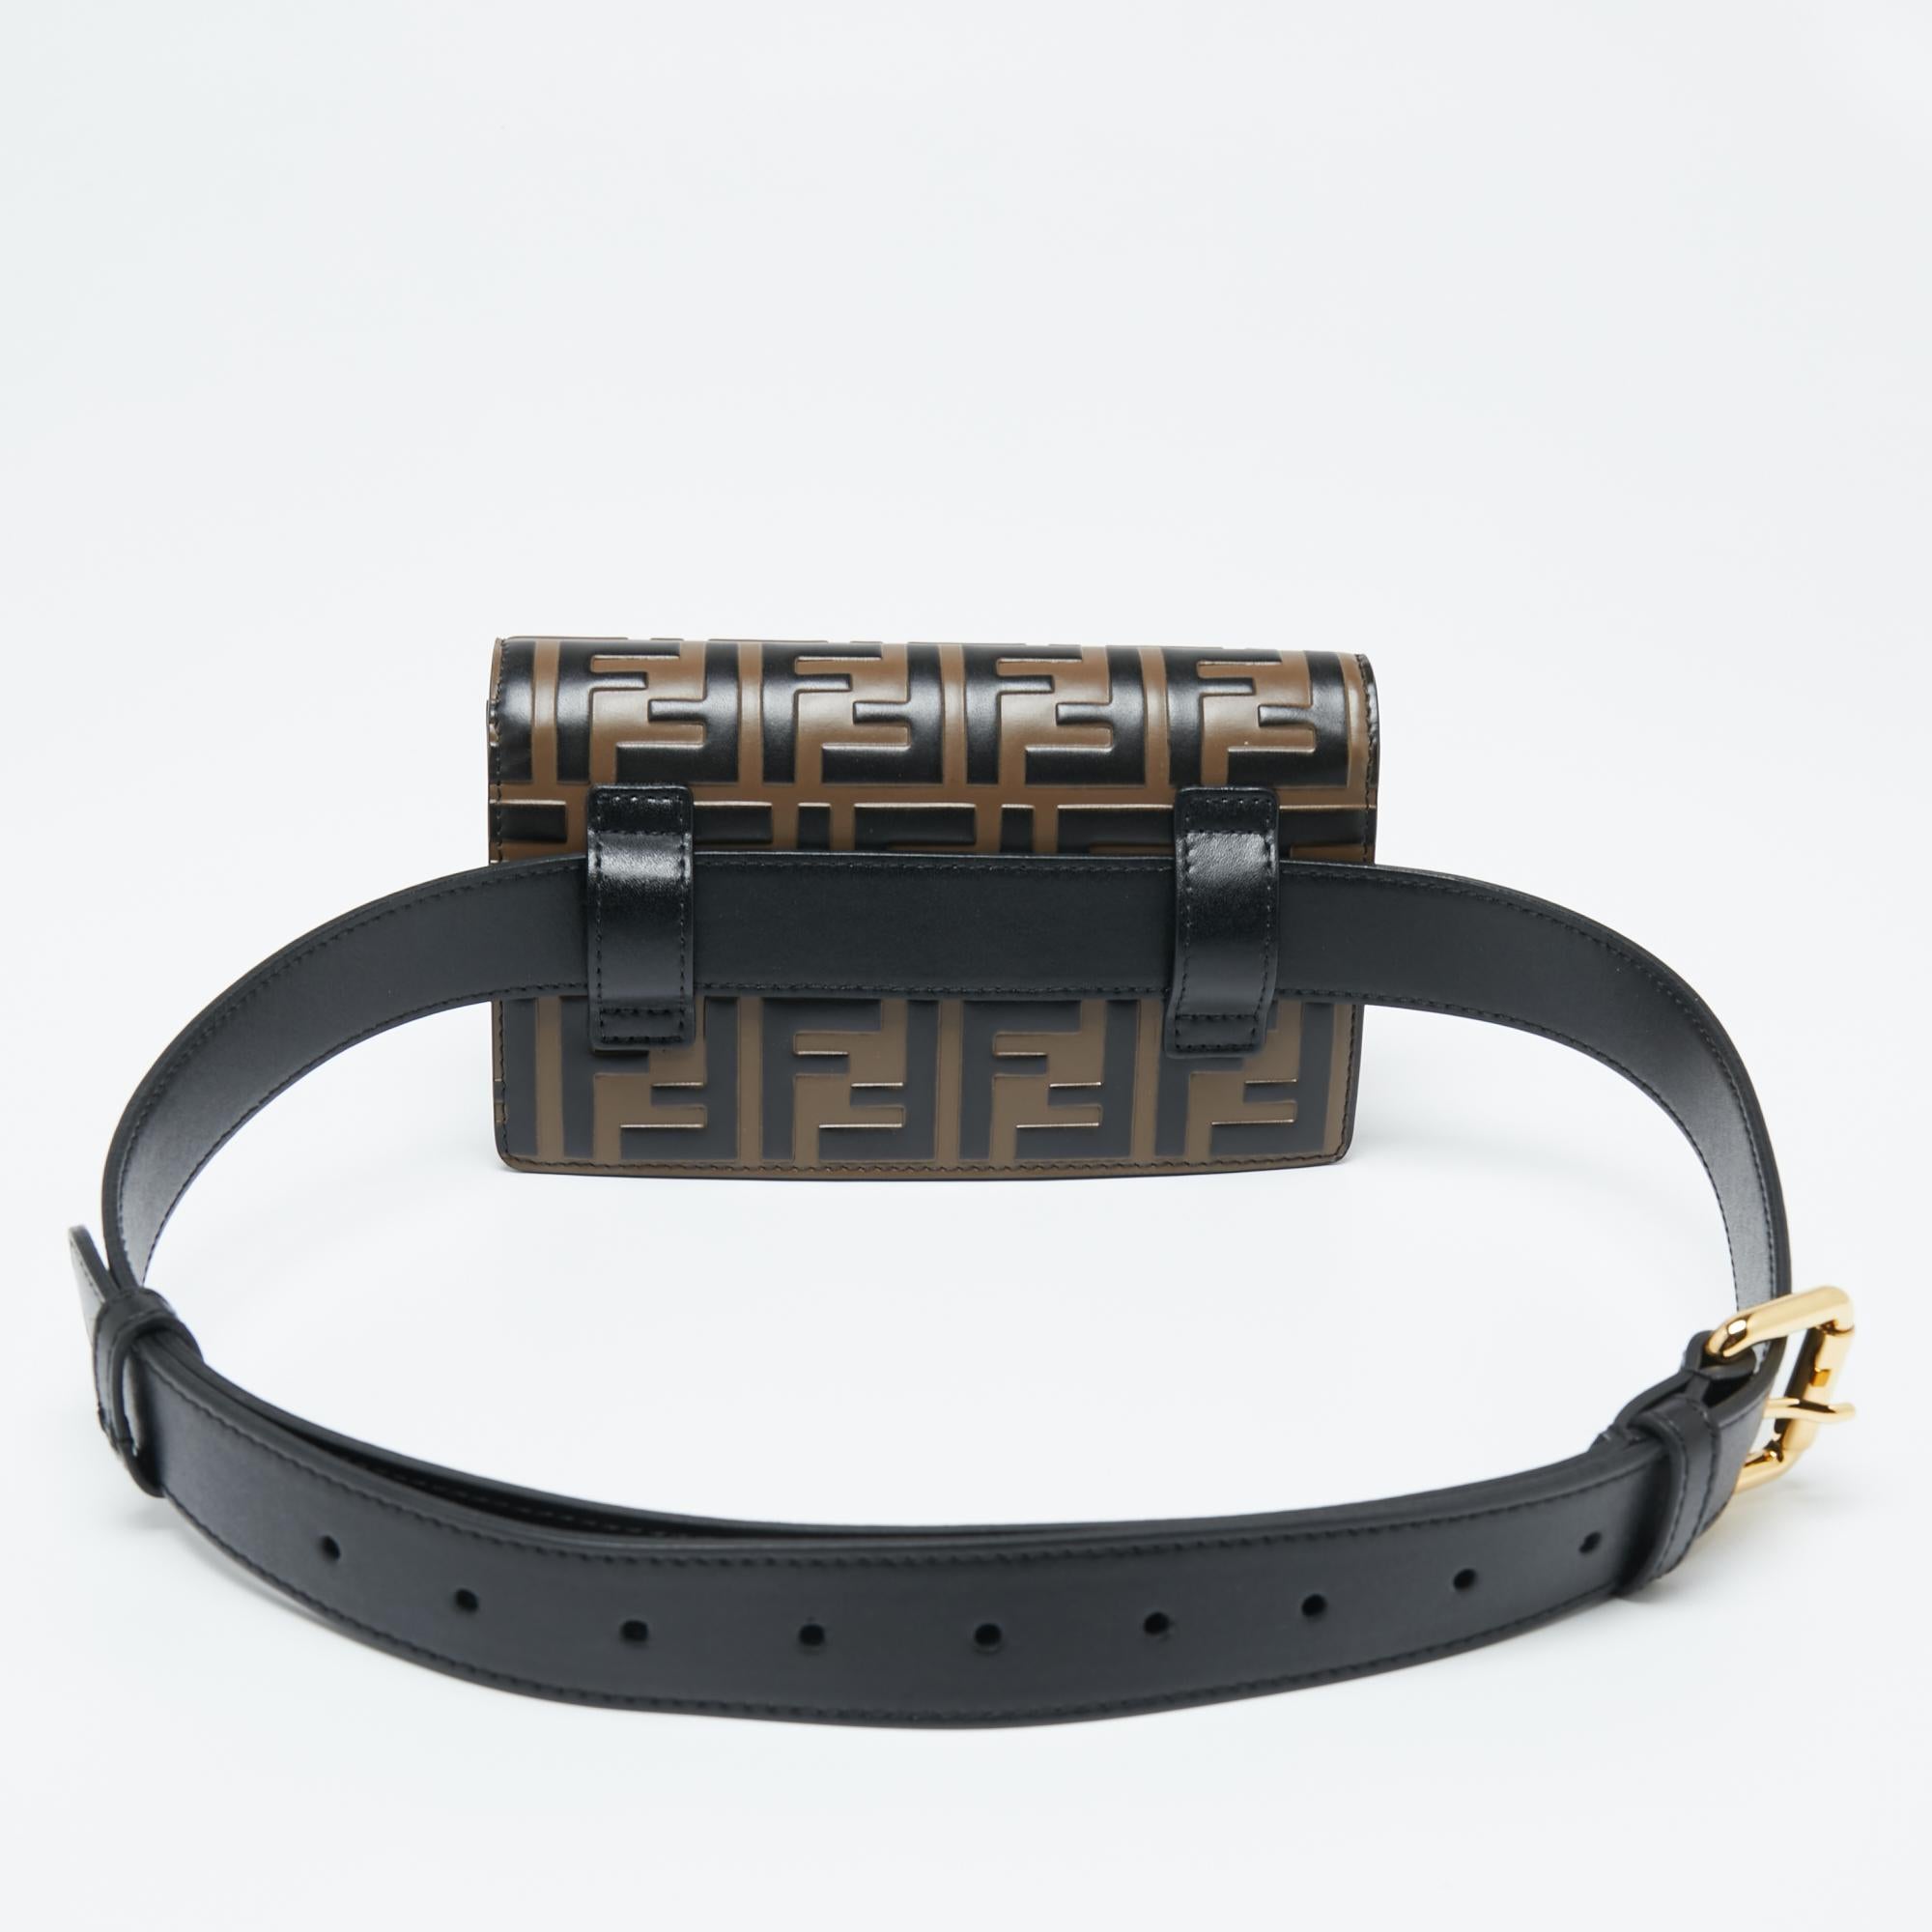 This Fendi belt bag blends a modern style with a popular House design—Kan I. Crafted from black and Tobacco Zucca leather, the belt bag has a lined interior, a metal chain, and a leather belt.

Includes: Original Dustbag, Chain Strap